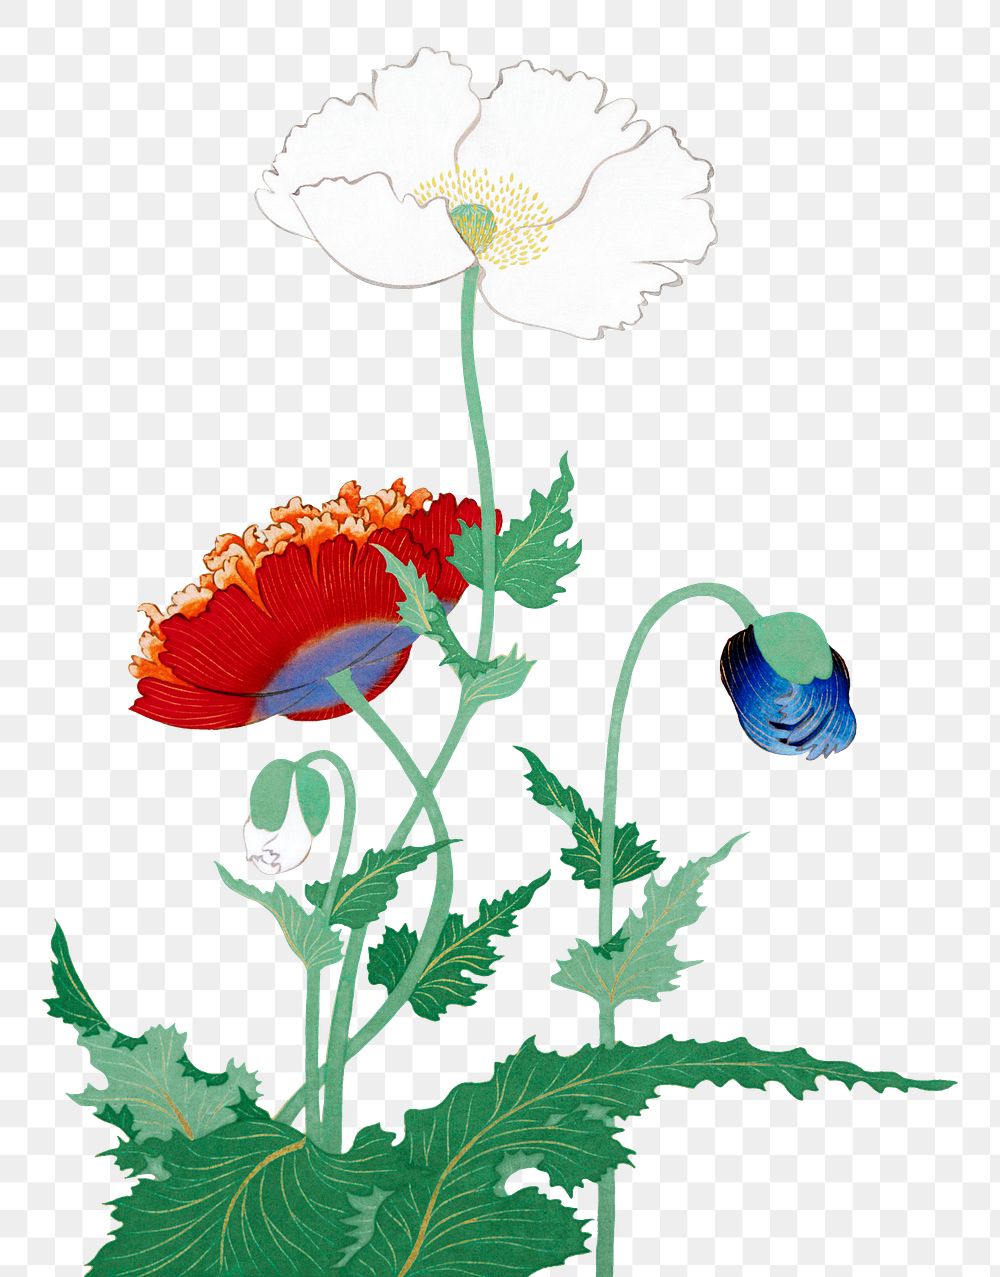 Japanese poppies png on transparent background.    Remastered by rawpixel. 